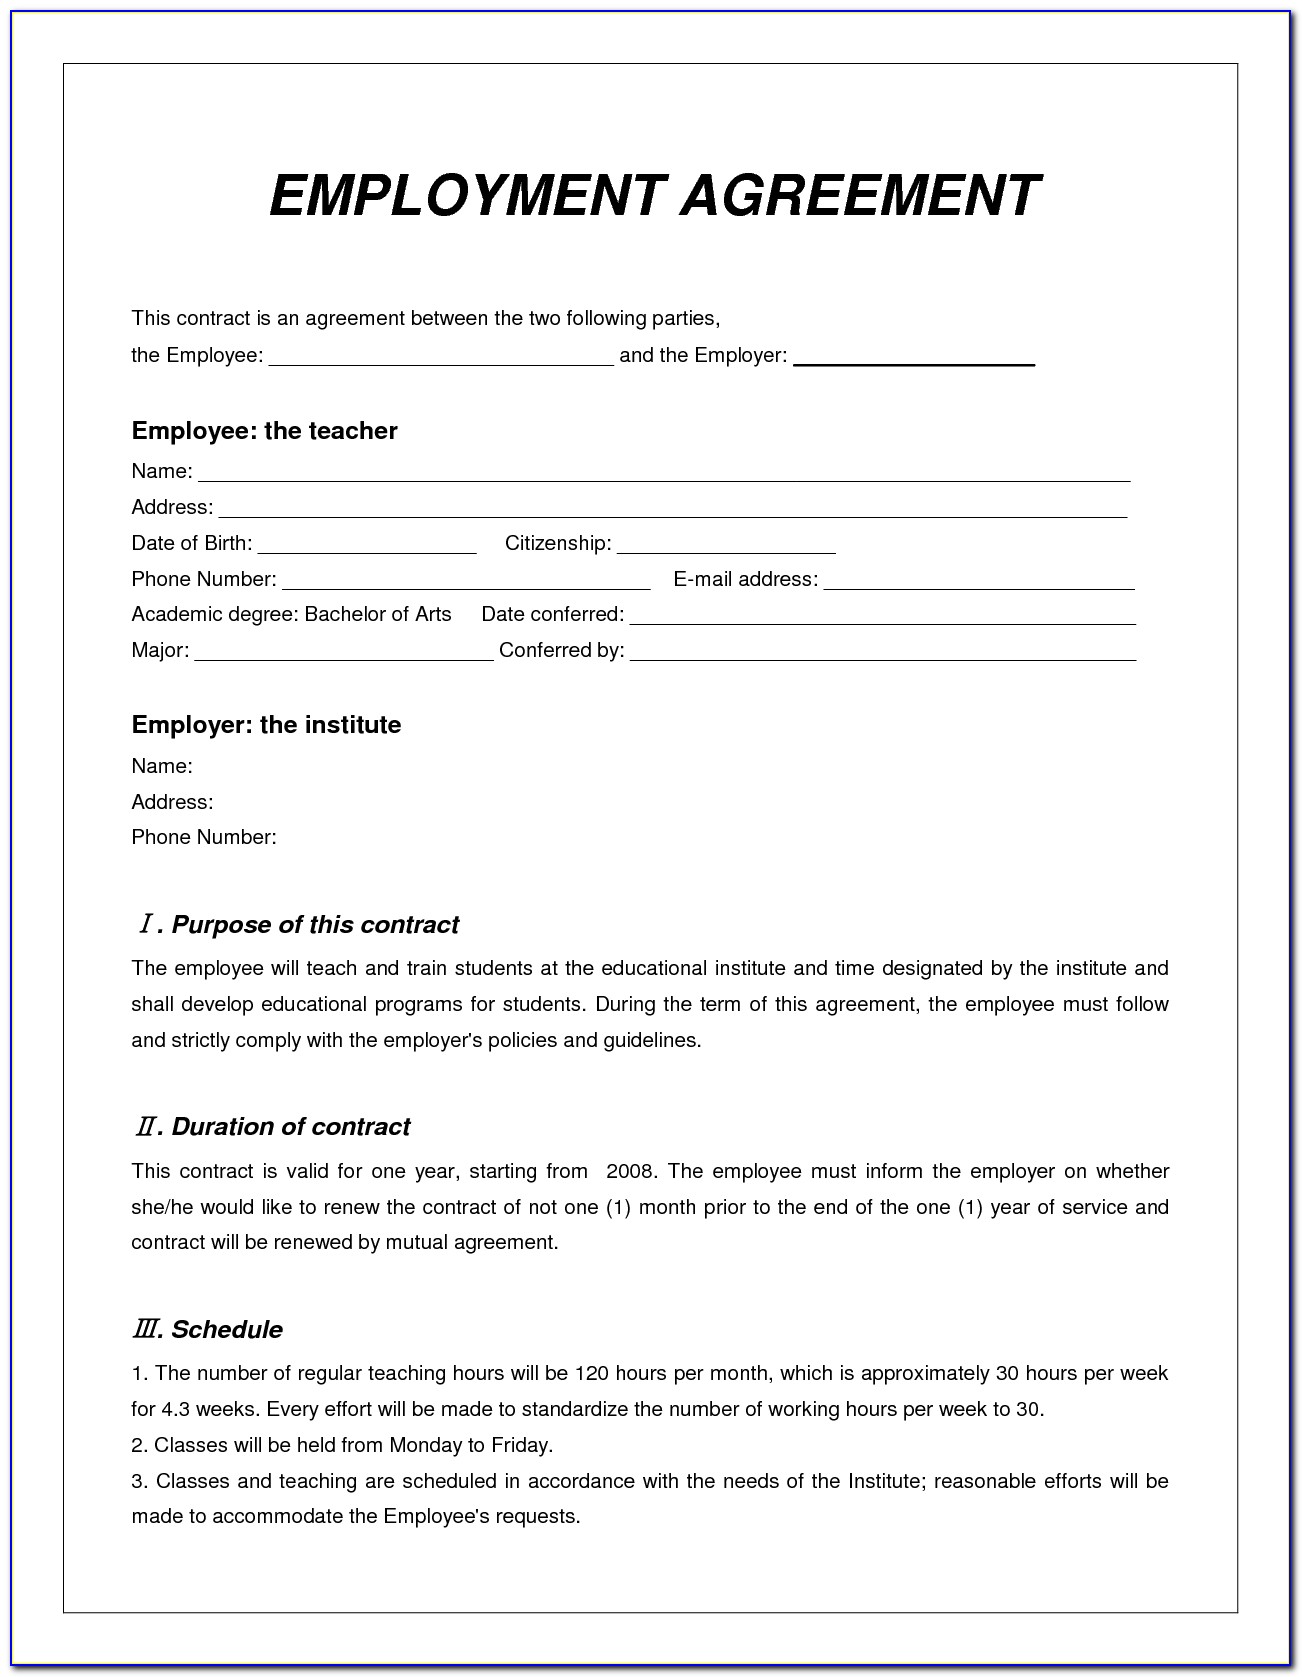 Construction Employment Contract Sample Philippines